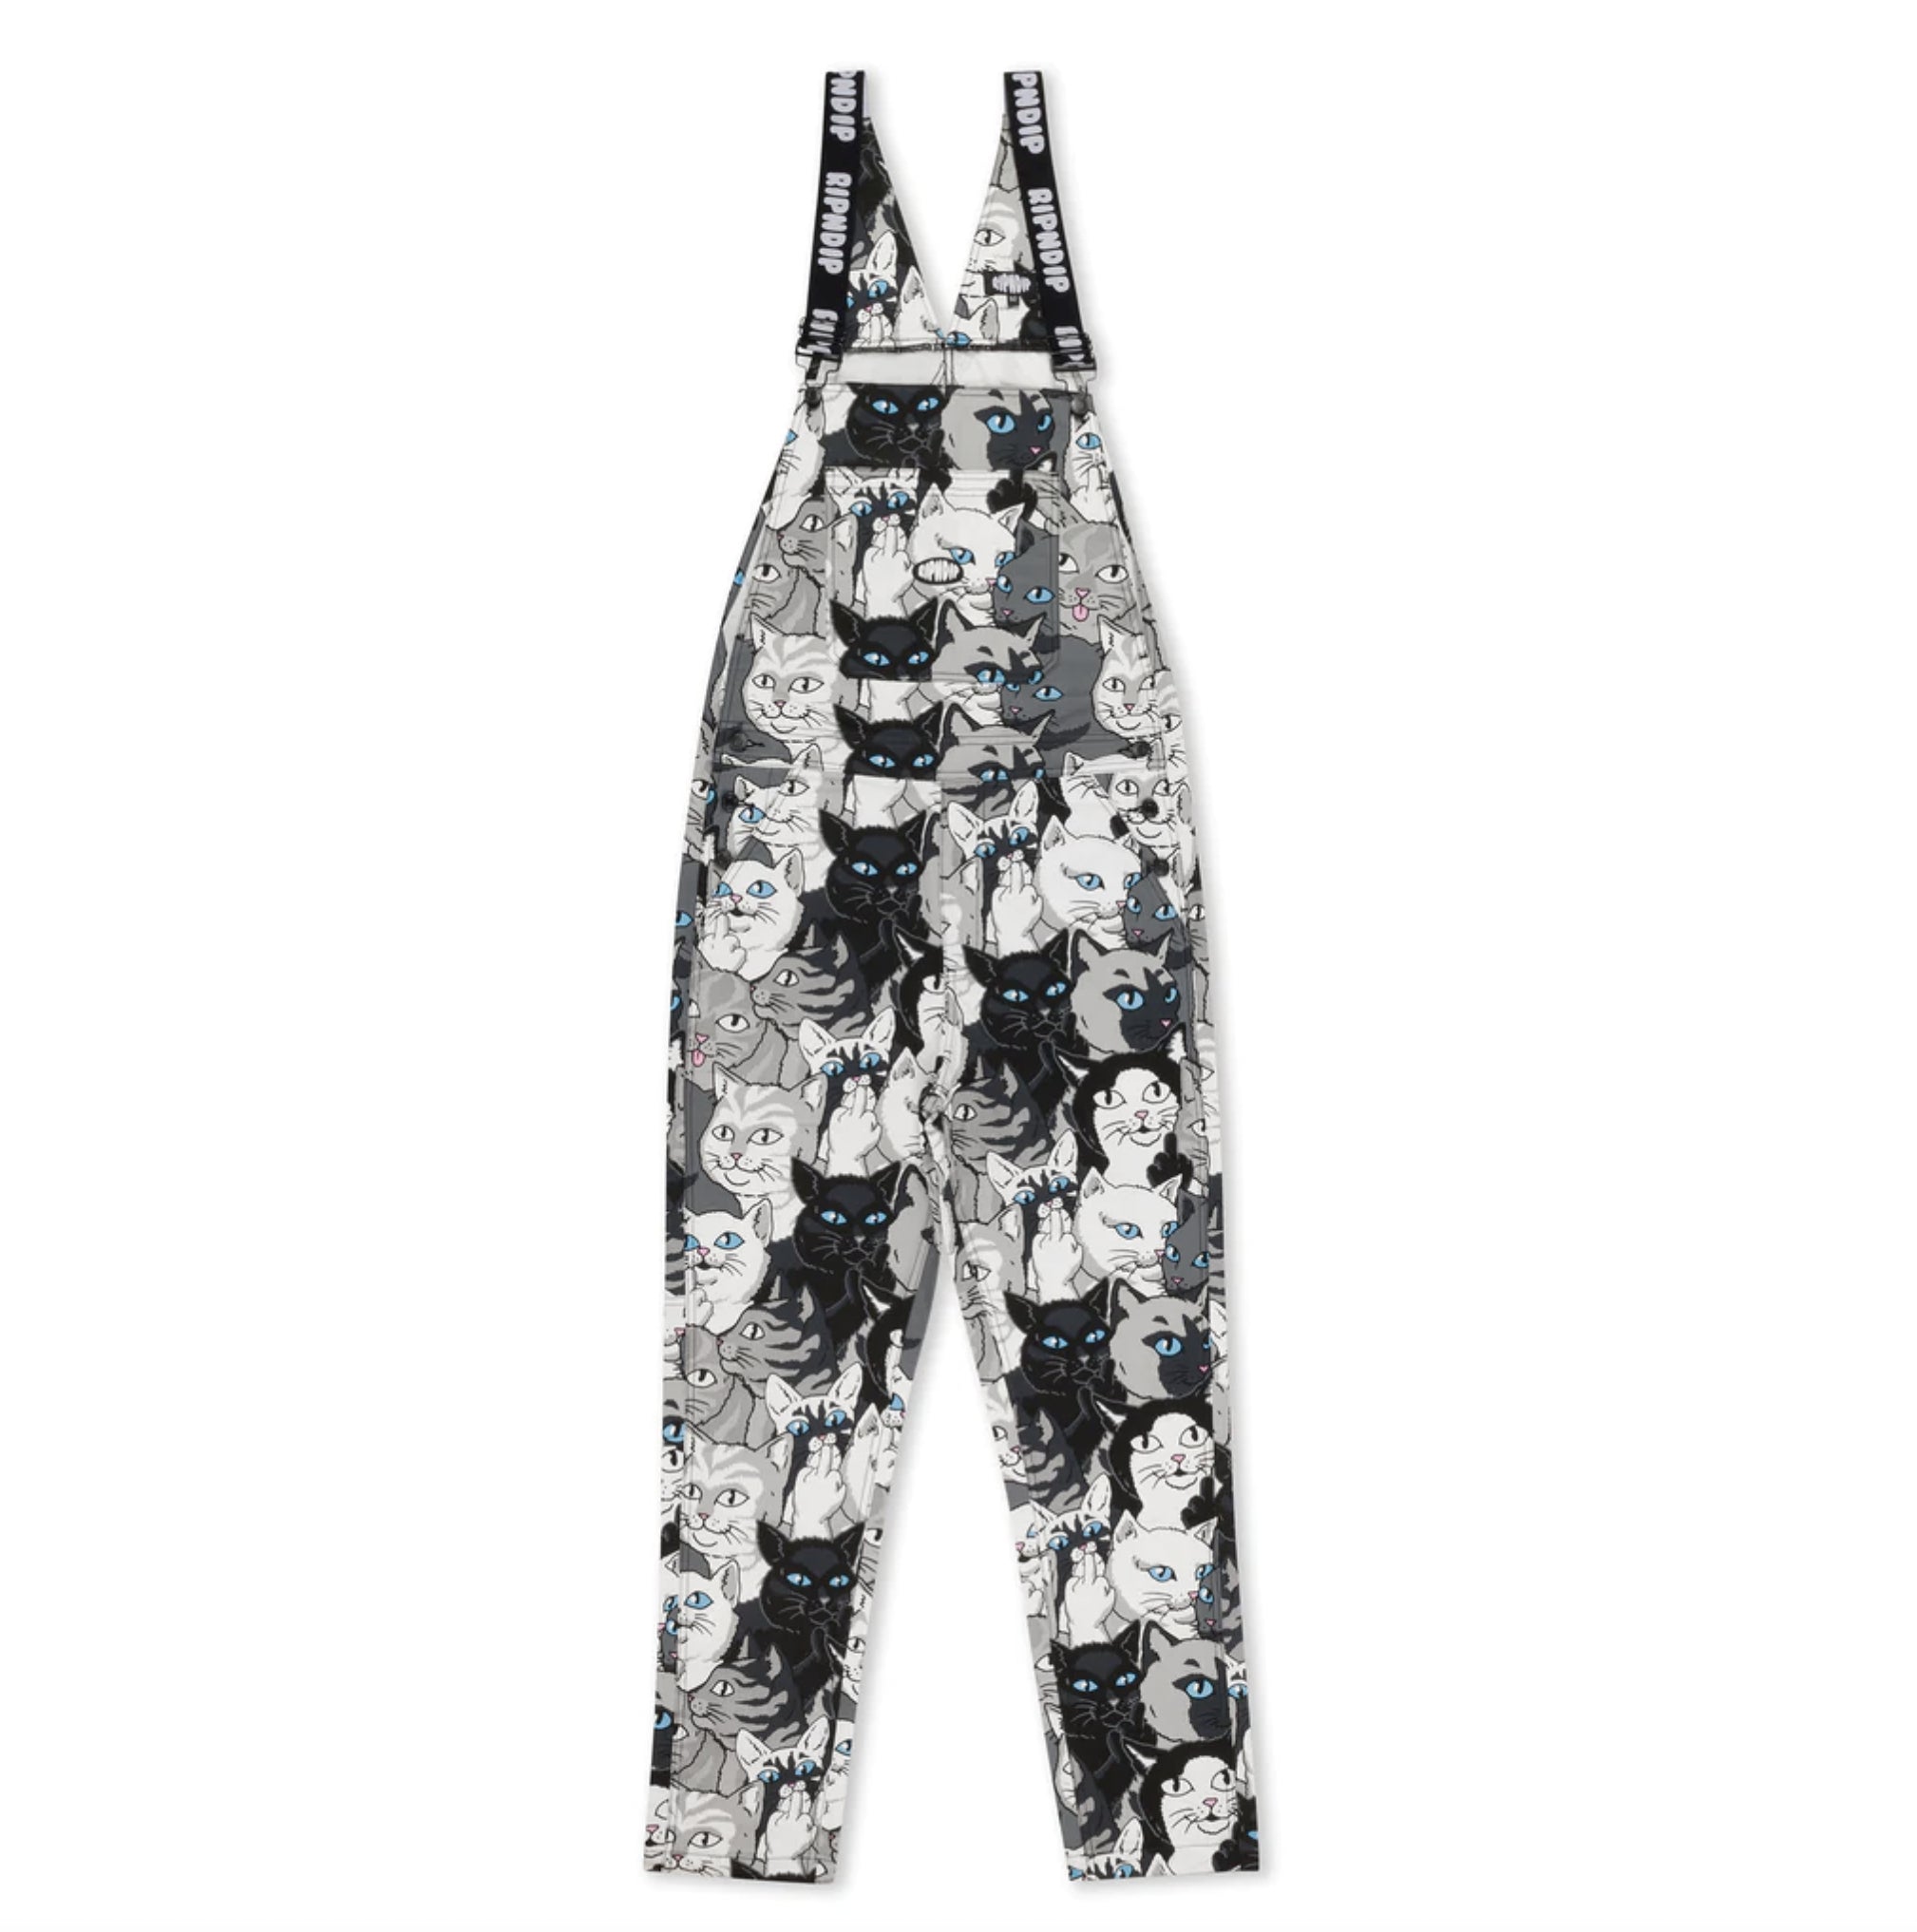 Family Tree Twill Overalls Men's Dungarees